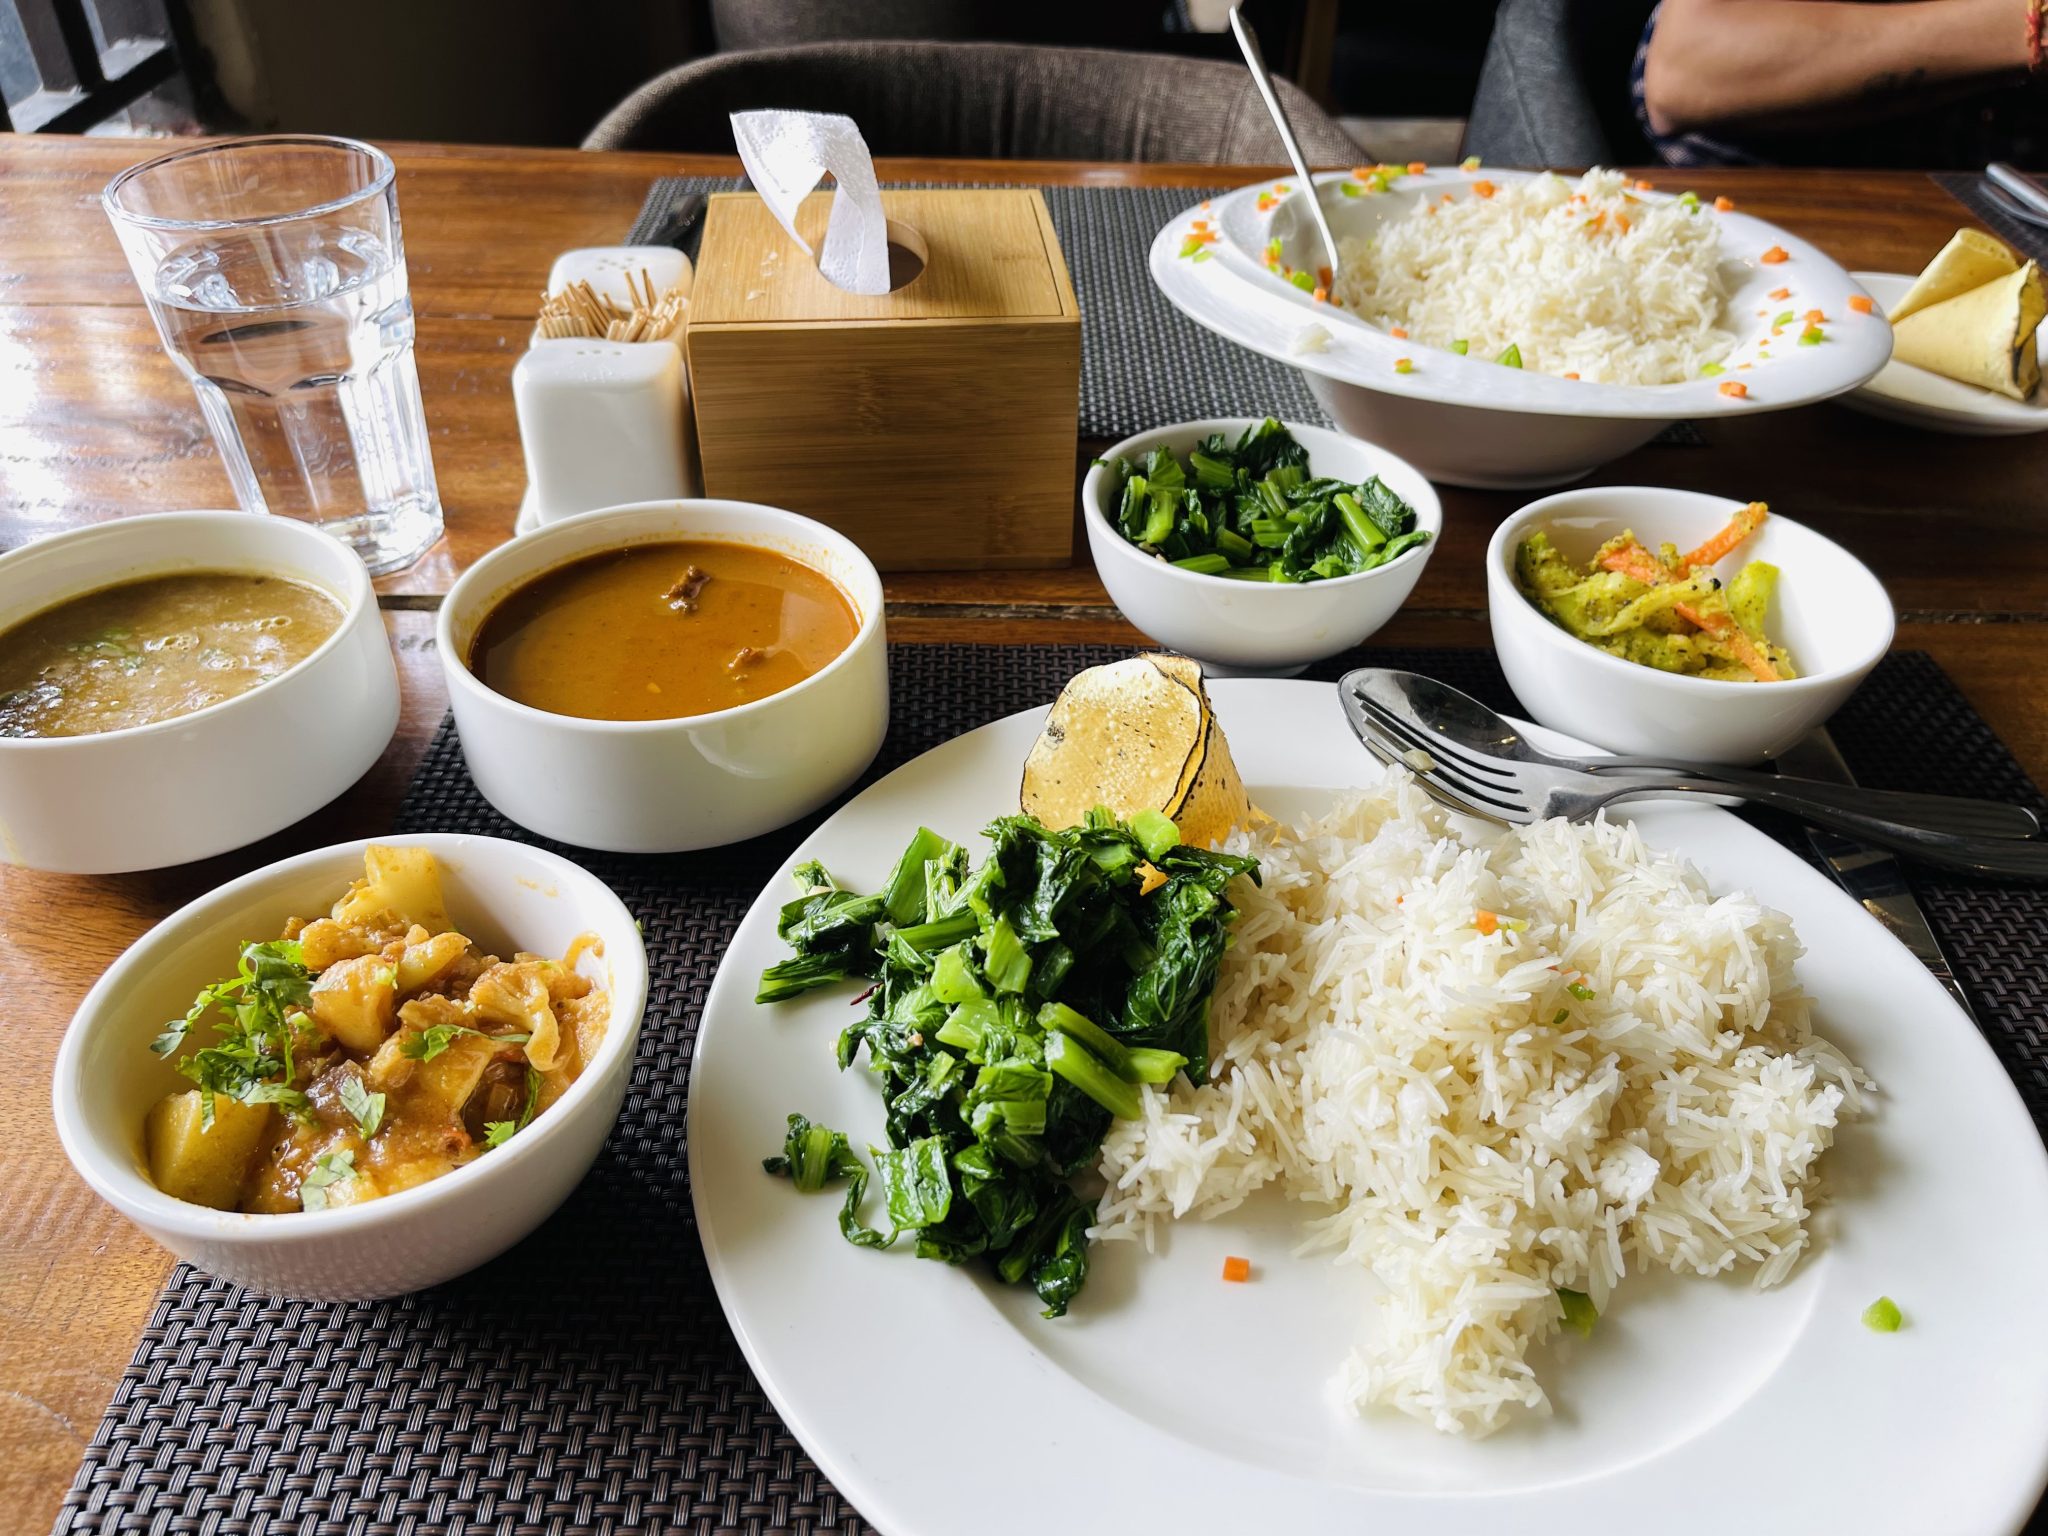 Nepali Lunch/Food. Large plate on the right with rice and some greens on it, three small bowls to the left with soups or gravies, tissues, toothpicks and a glass of water in the center of the table.